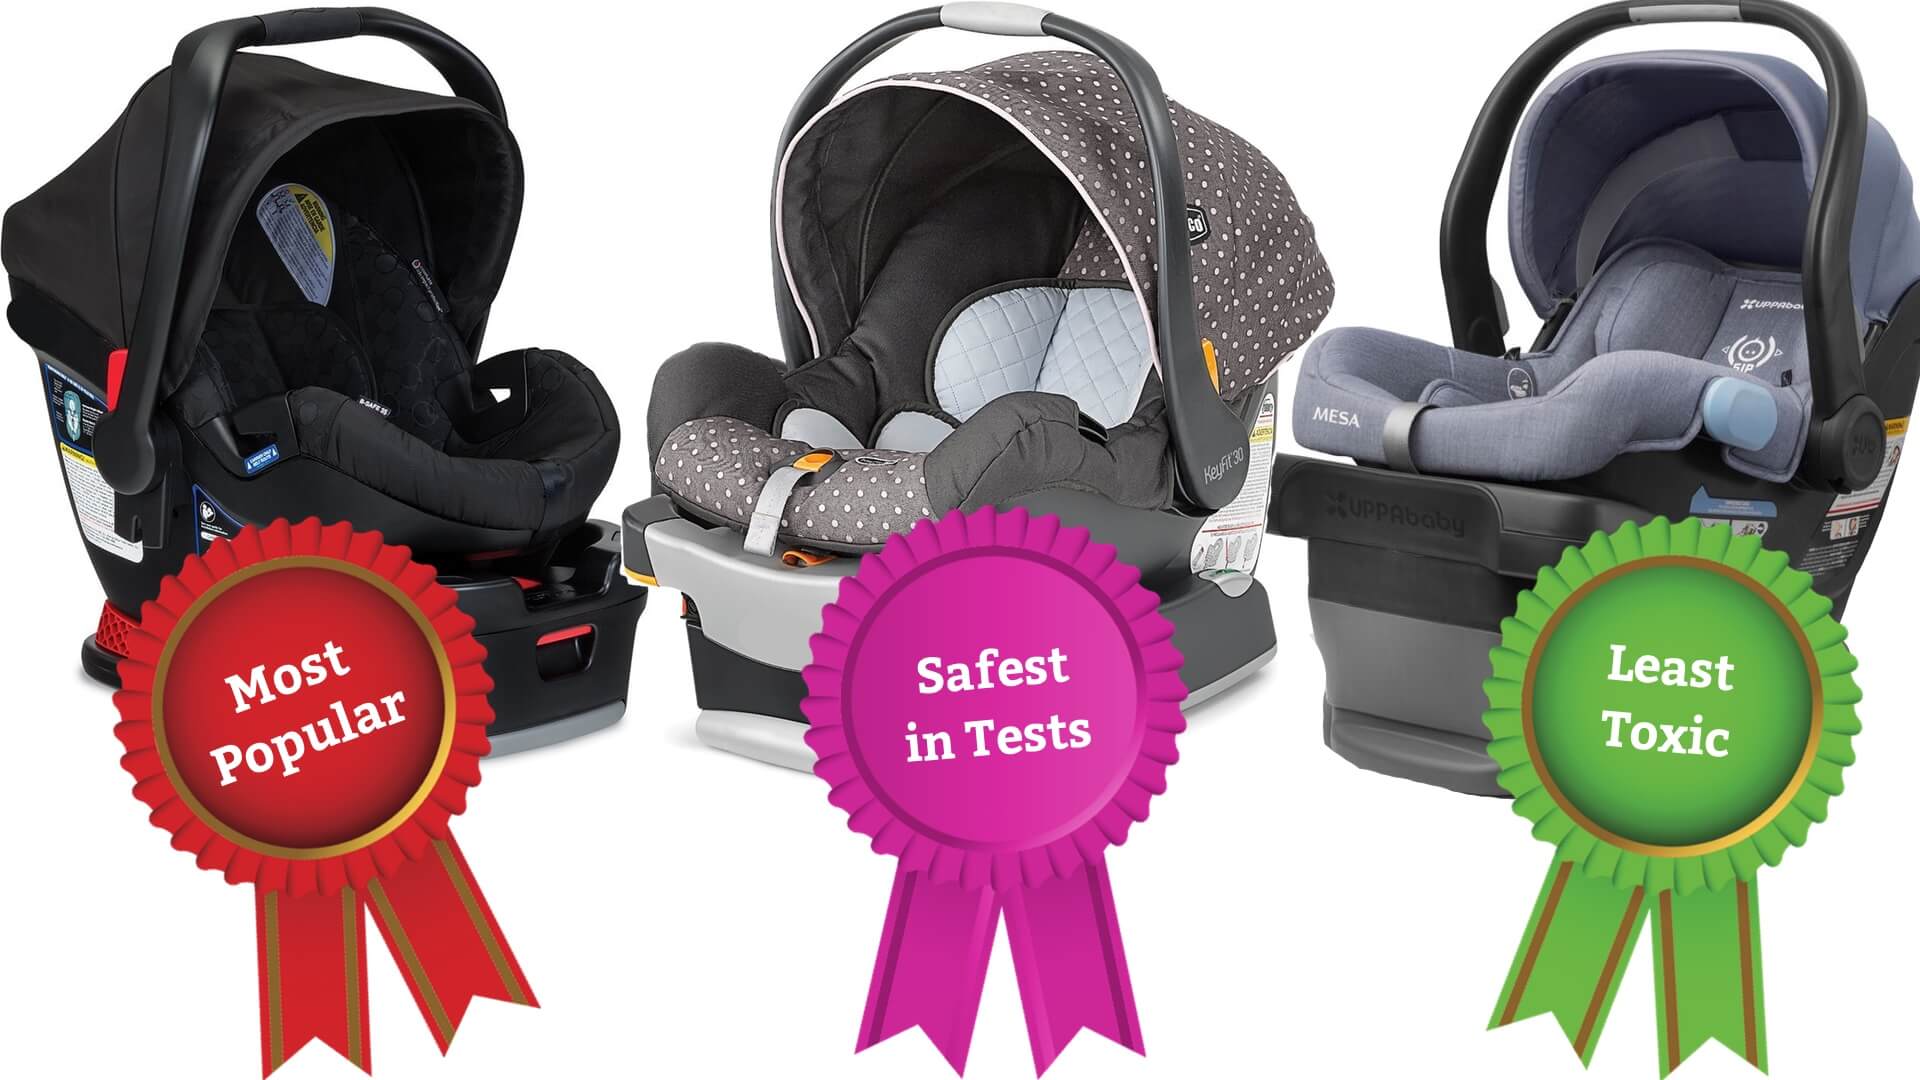 Best Infant Car Seat Safest Most Natural Options - What Are The Best Car Seats For Infants